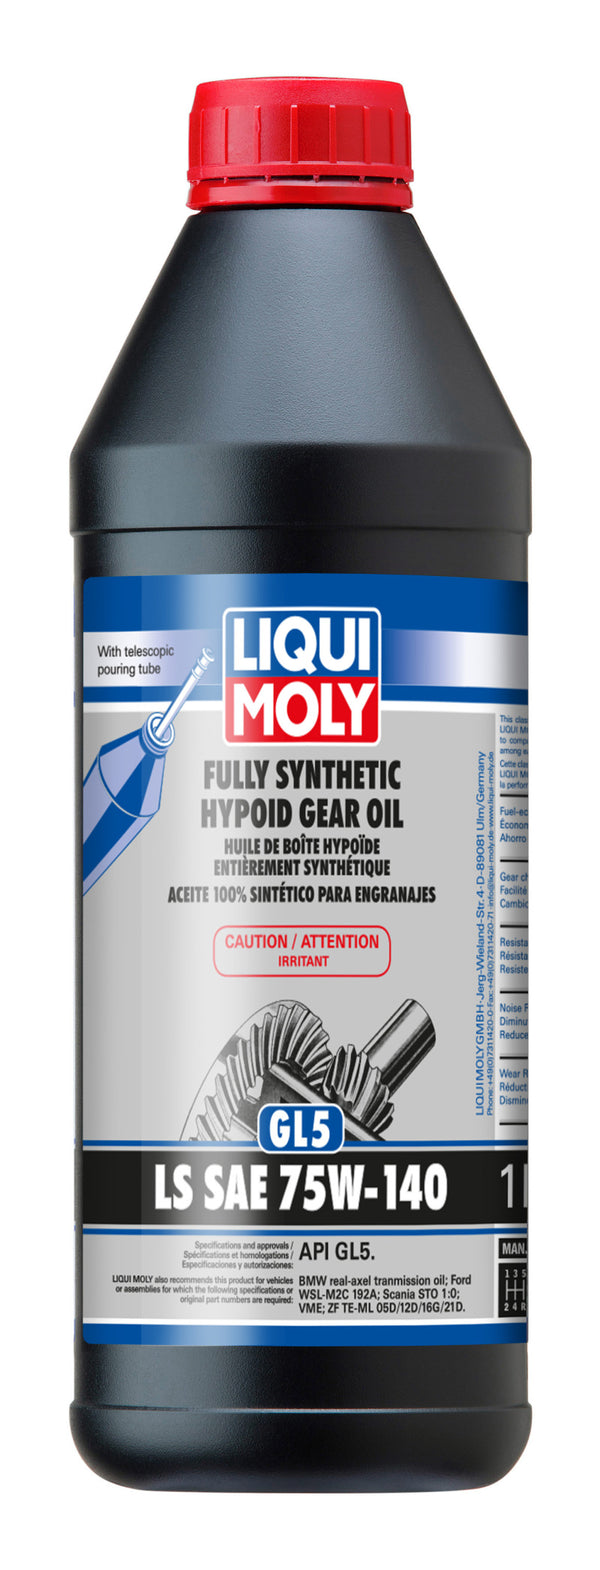 LIQUI MOLY 1L Fully Synthetic Hypoid Gear Oil (GL5) LS SAE 75W140 - Case of 6